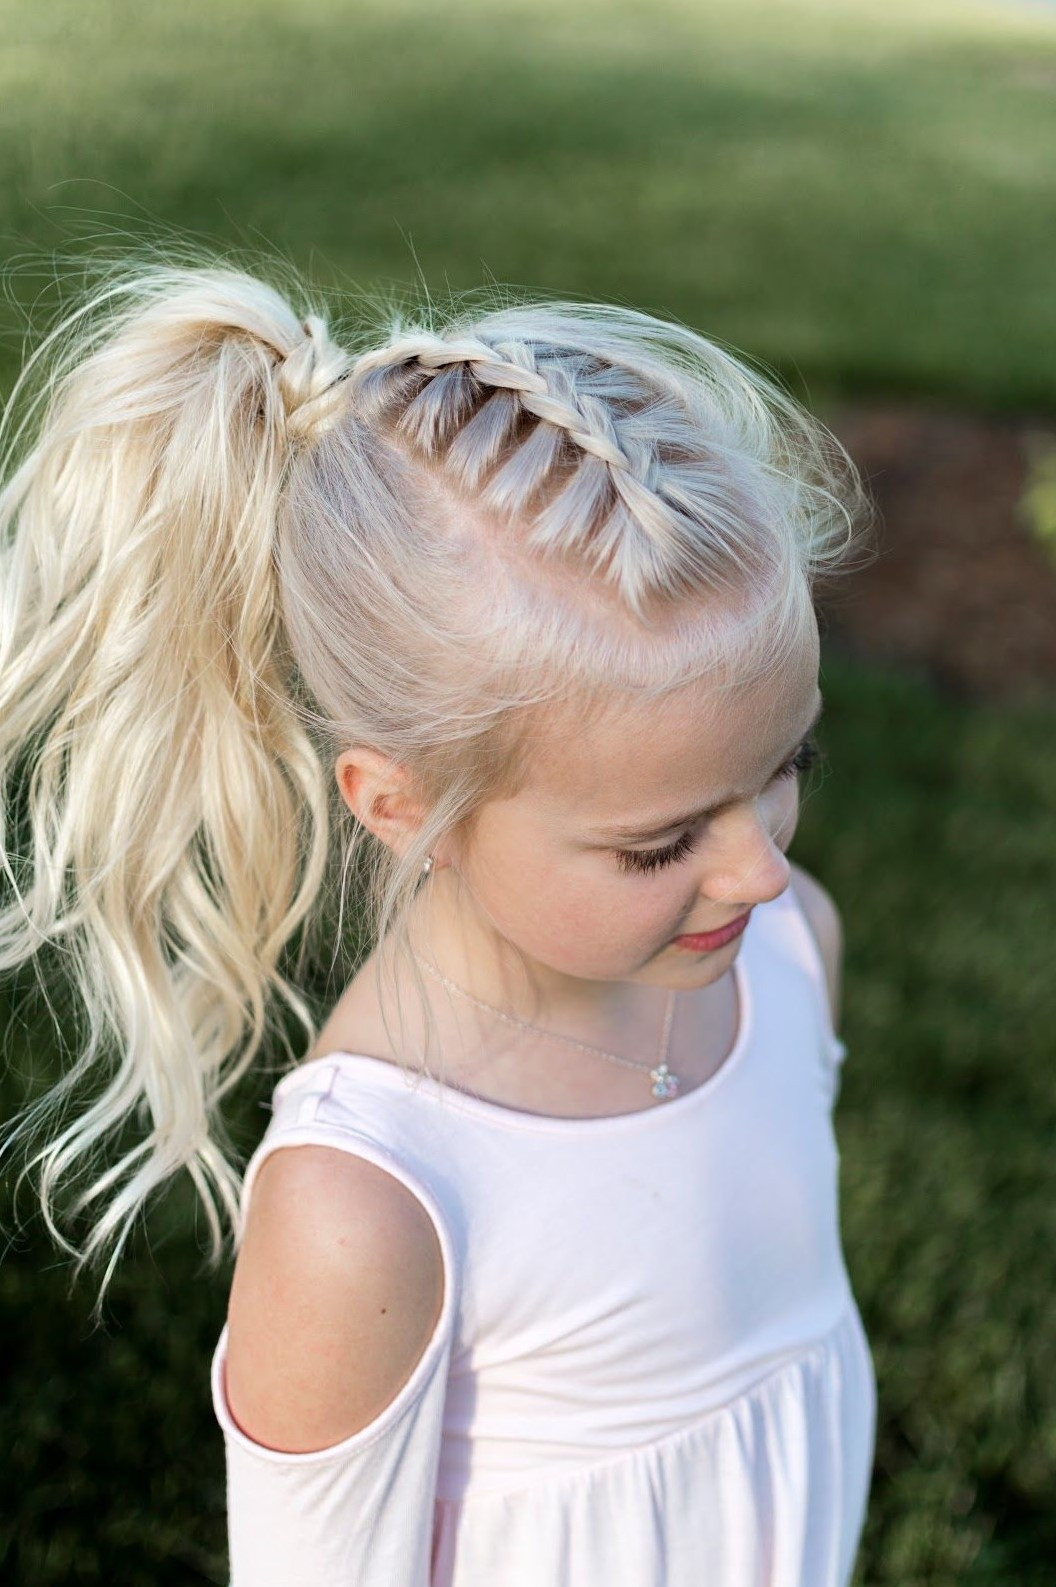 41+ Adorable Hairstyles for Little Girls - Sensod